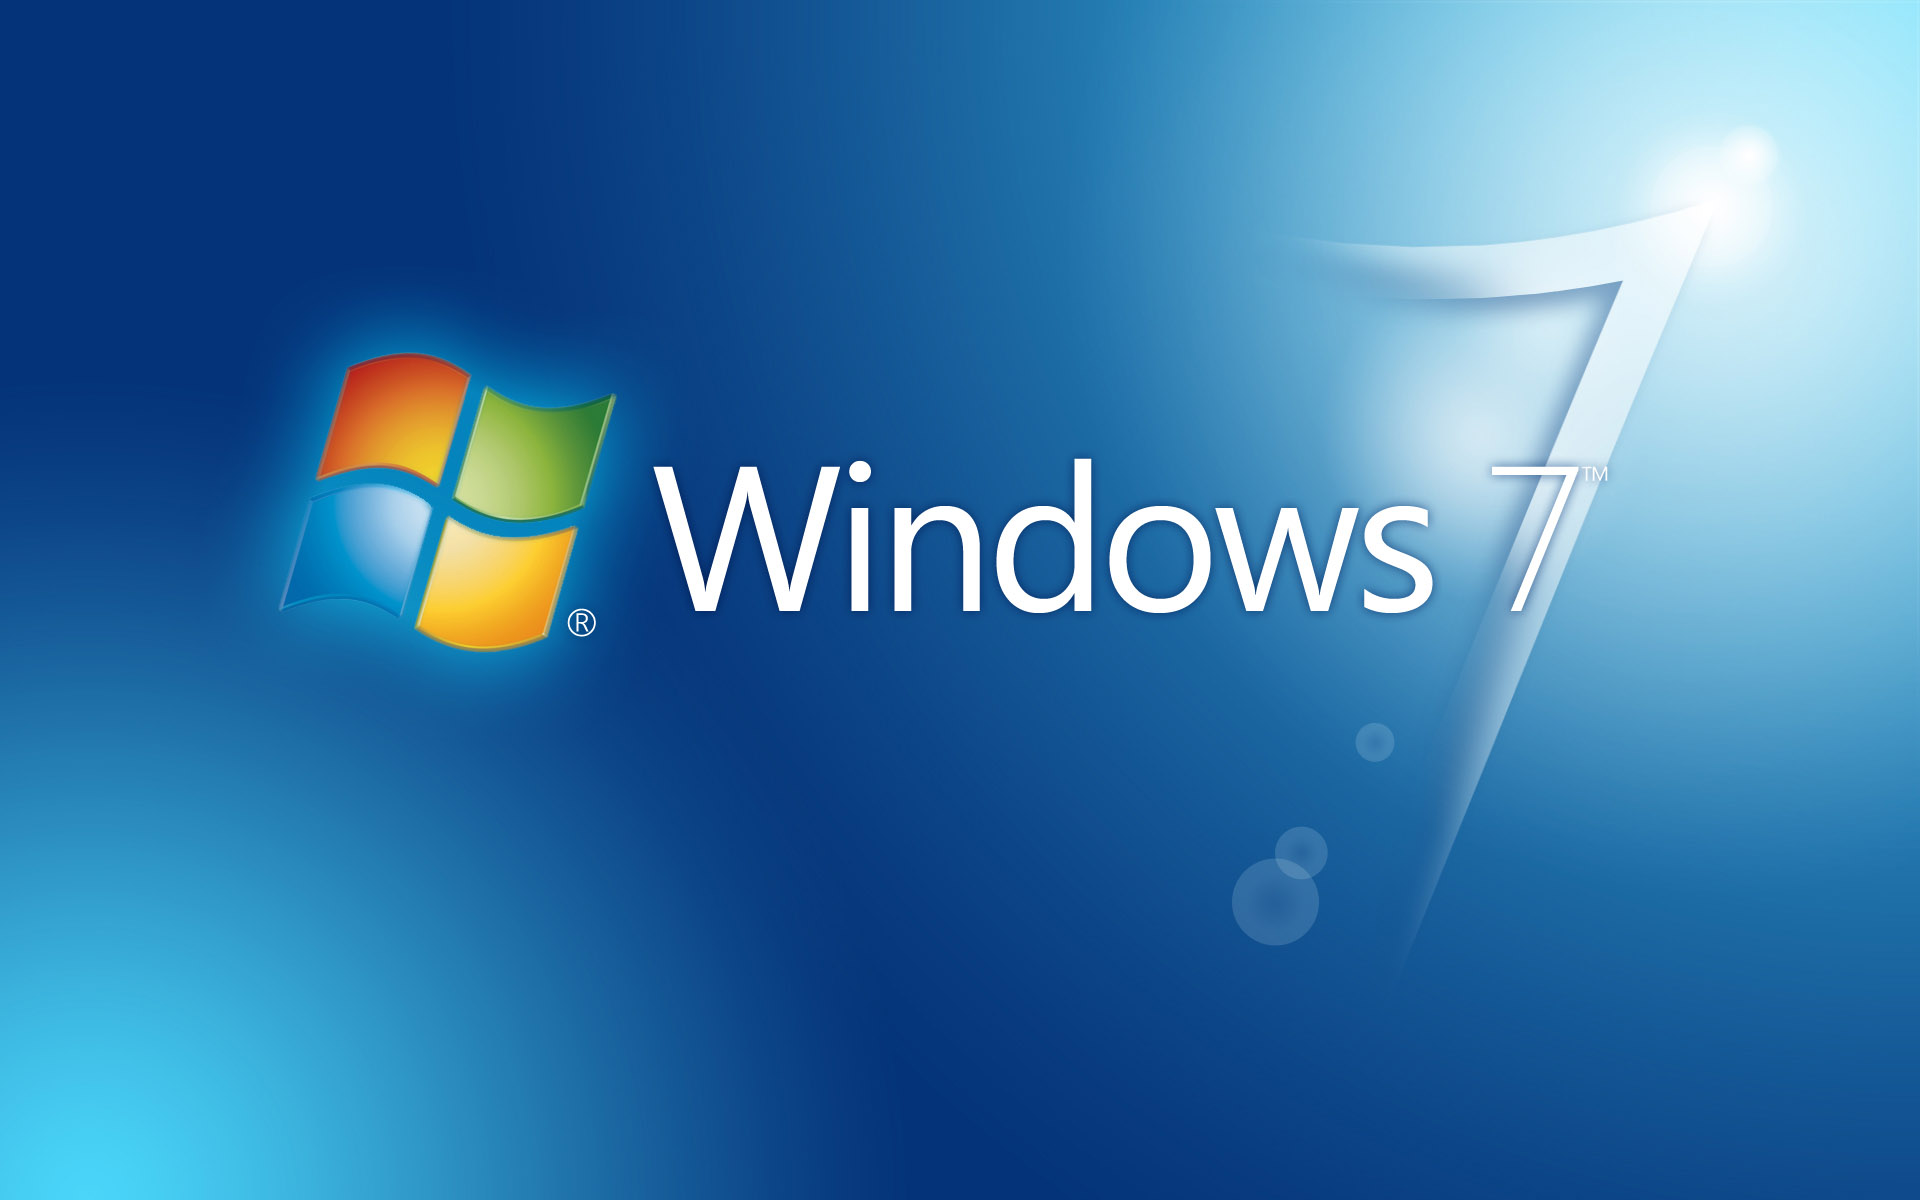 Free HQ Windows 7 Ultimate 49 Wallpaper   Free HQ Wallpapers